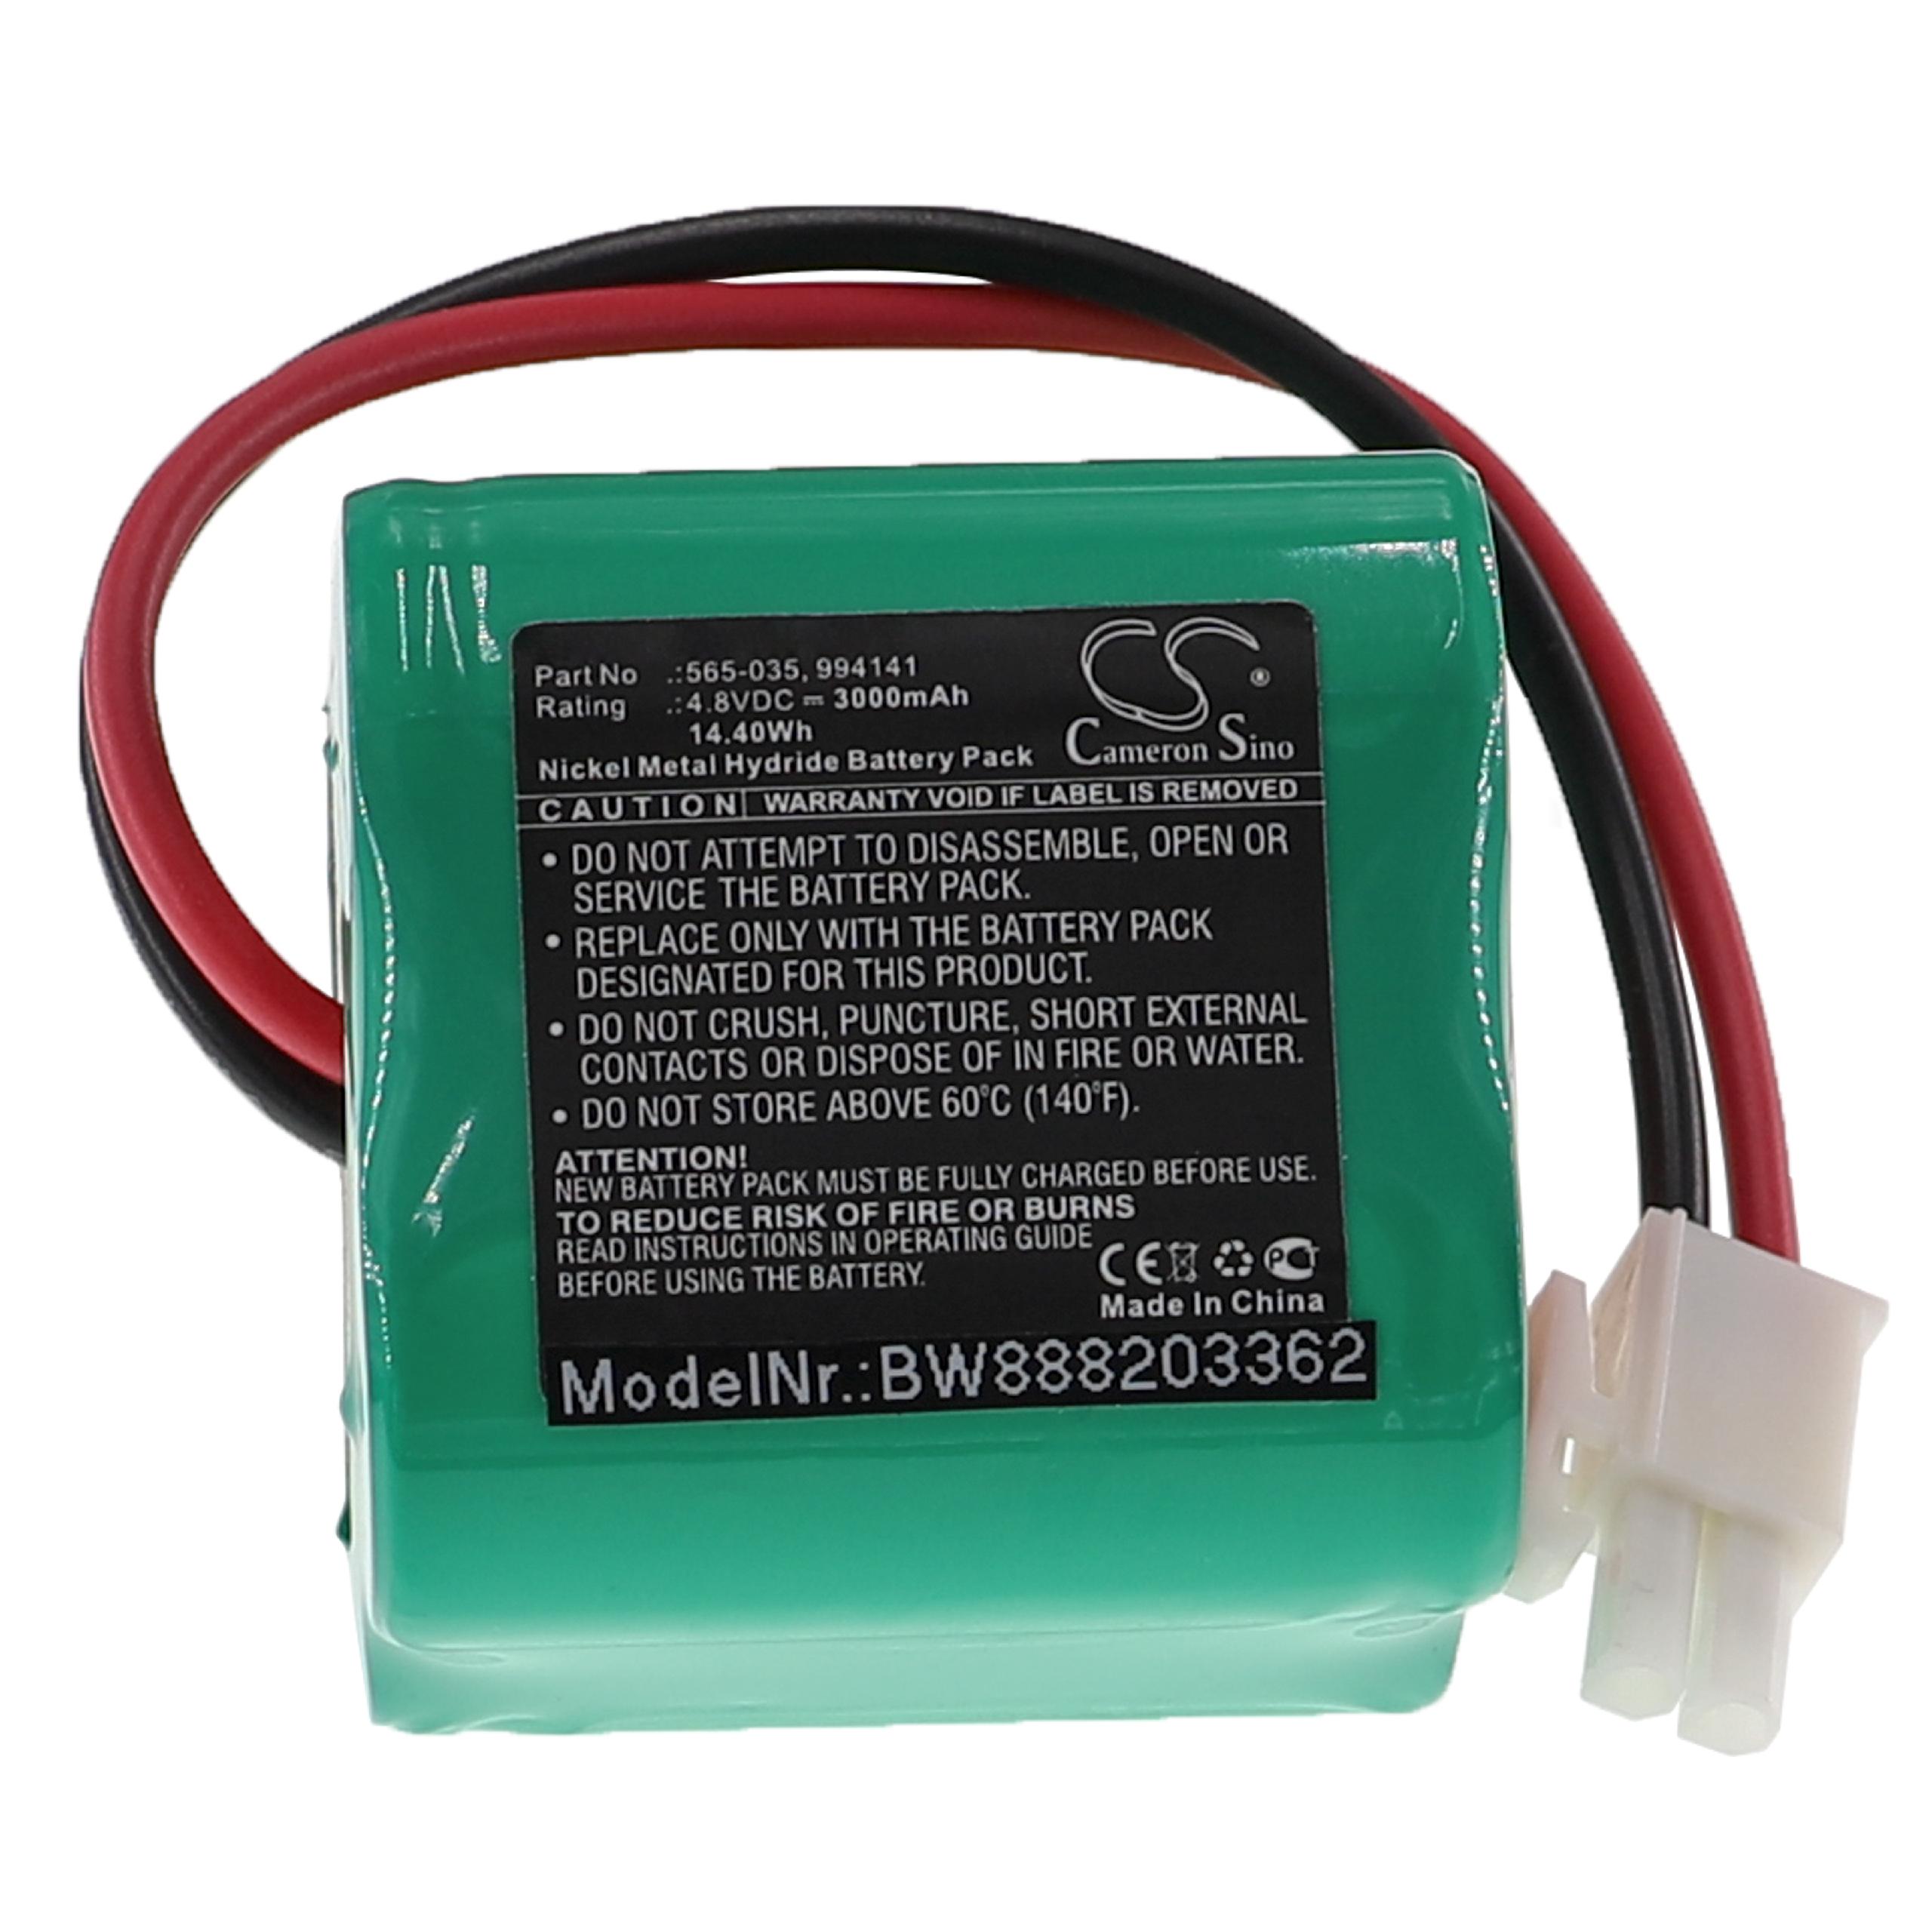 Bug Zapper Battery Replacement for Mosquito Magnet 565-035, MM565035, 9994141 - 3000mAh 4.8V NiMH